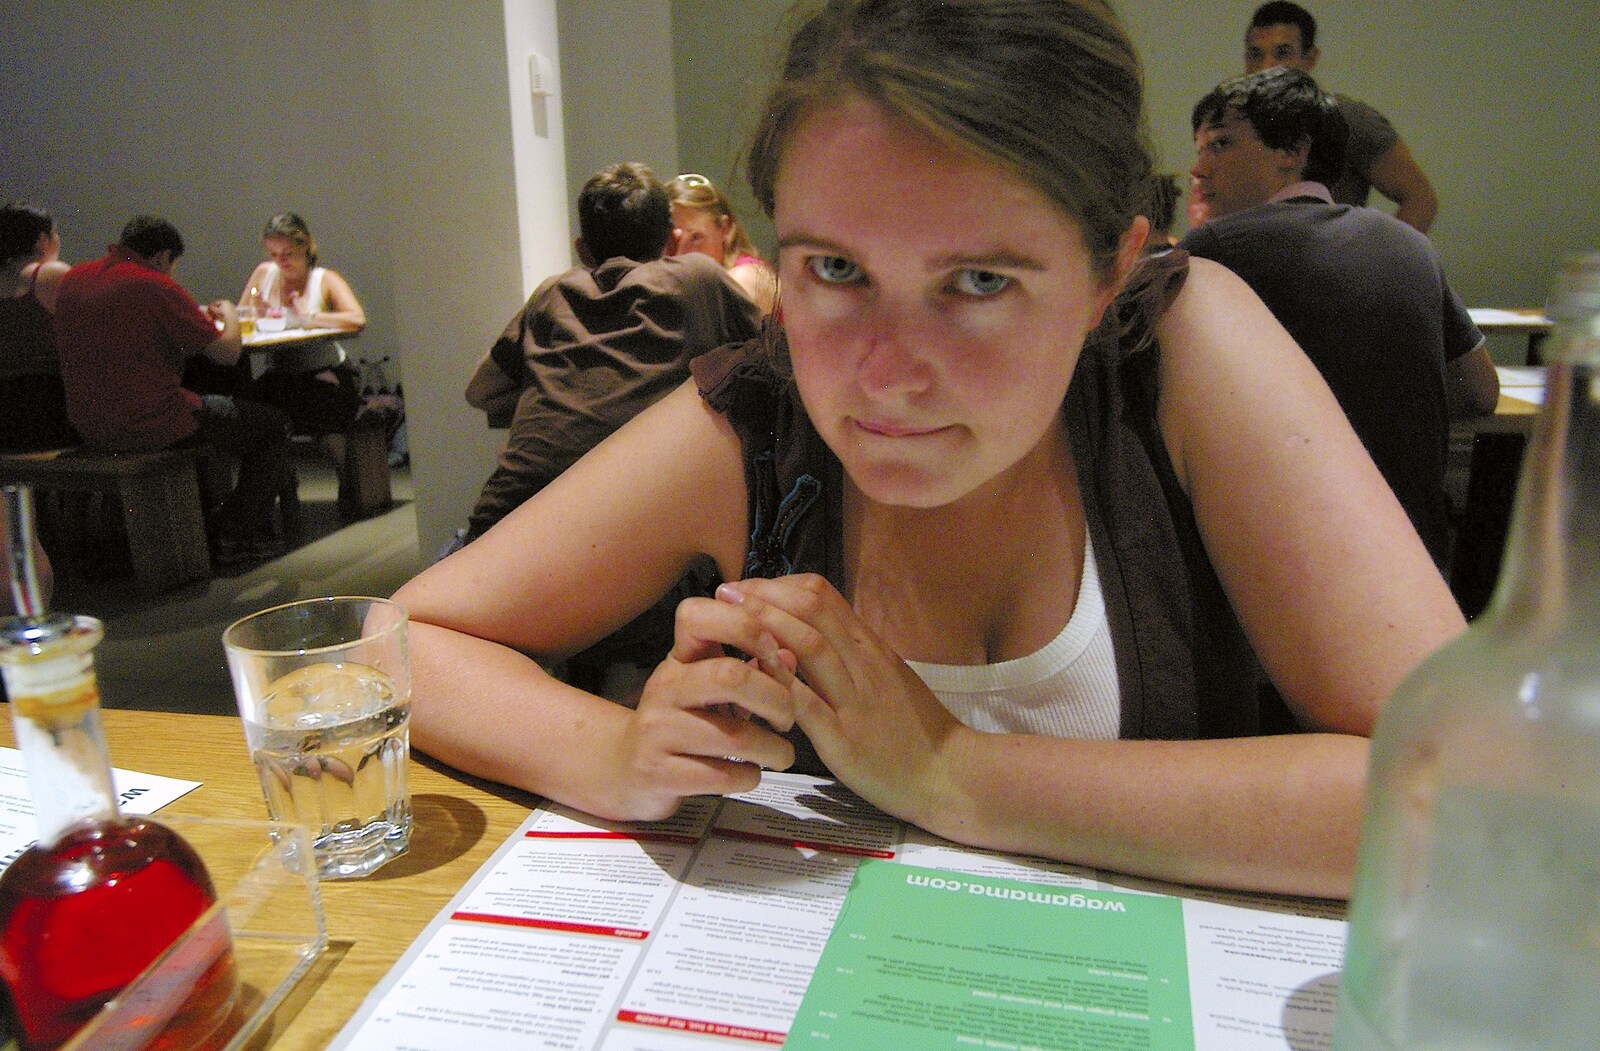 Choosing food in Wagamama's by the Festival Hall from A Trip on the London Eye and Bill's BBQ, London and Suffolk - 21st July 2006